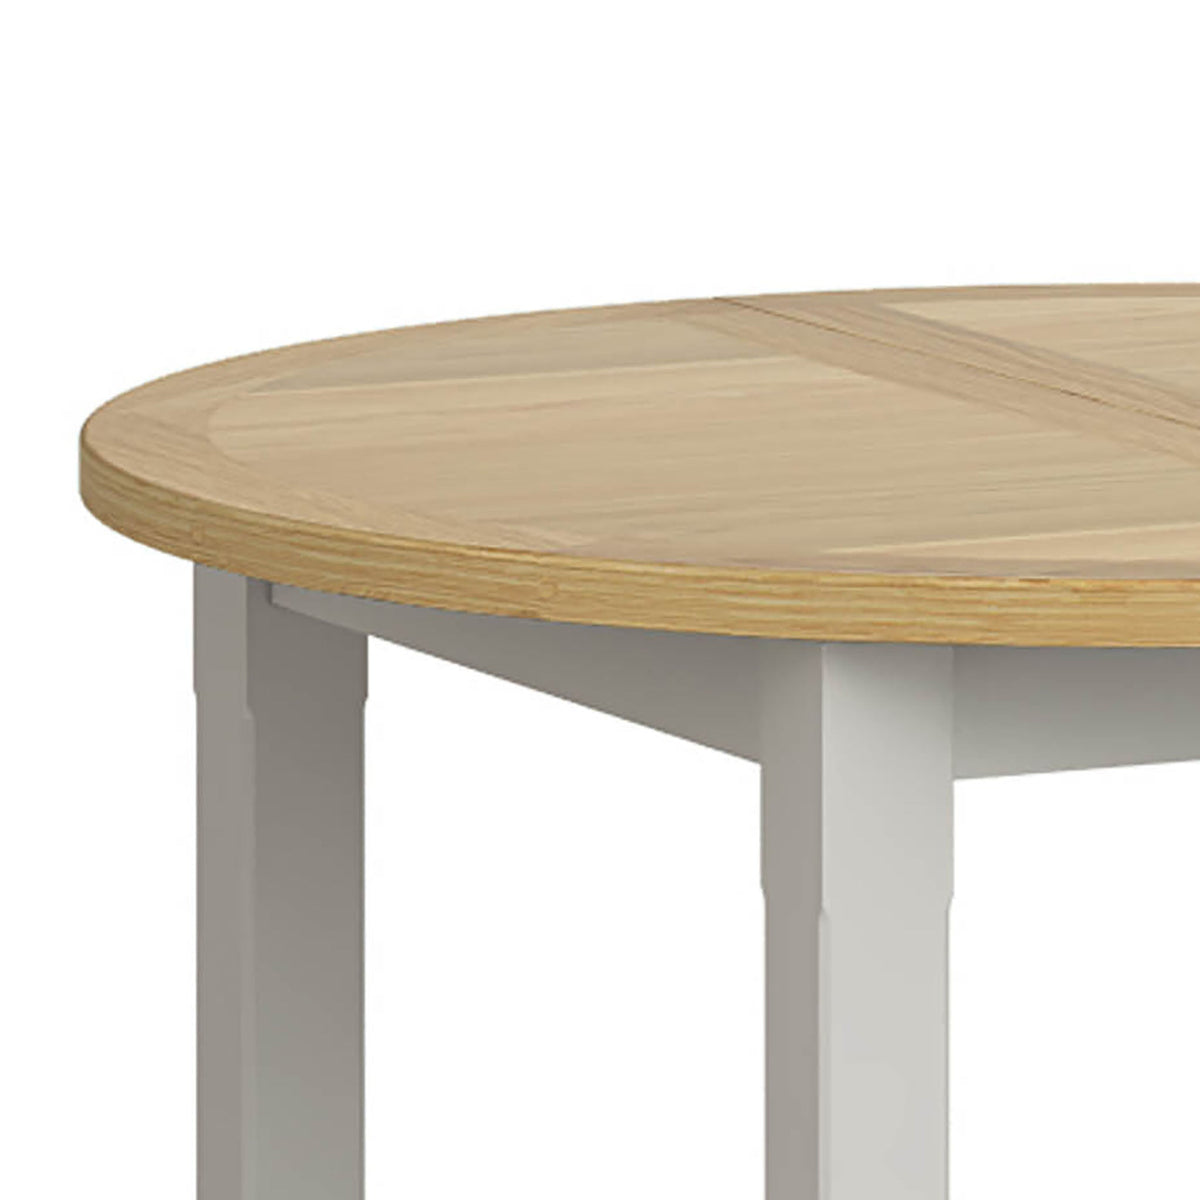 Lundy Grey Round Extending Dining Table - Close Up of Oak Table Top